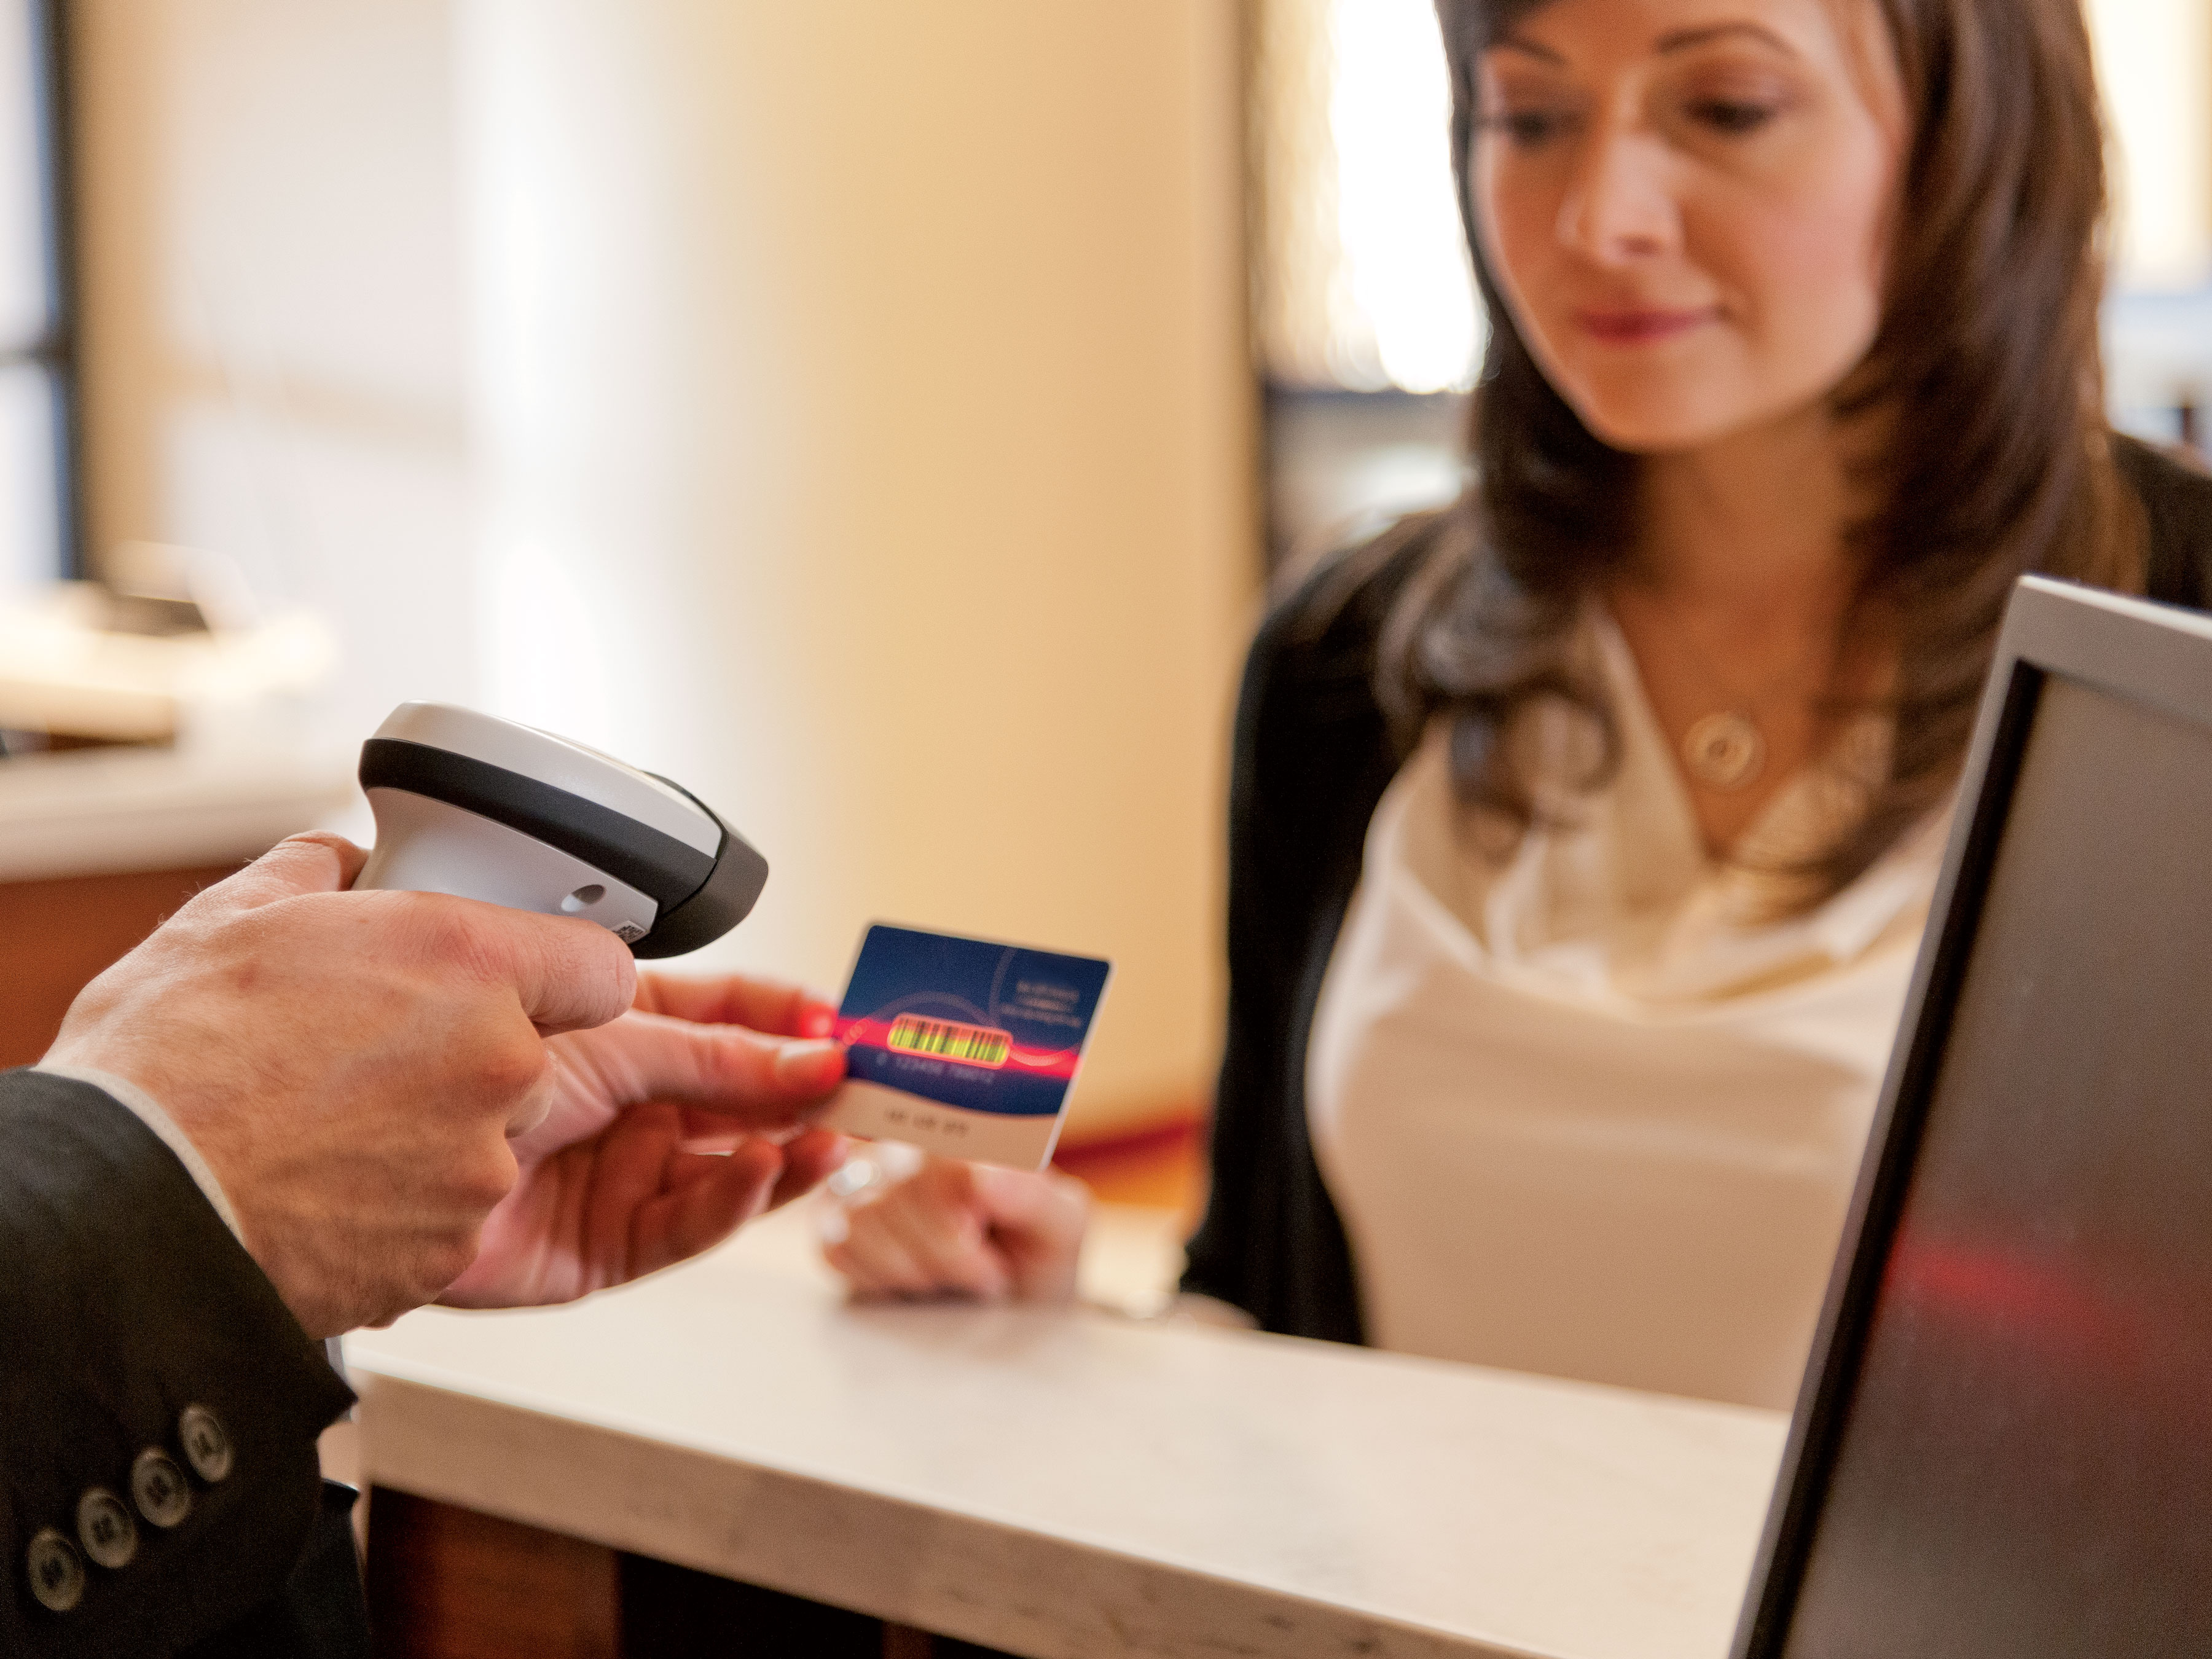 Hotel employee checking in guest with LI2208 scanner and custom printed card